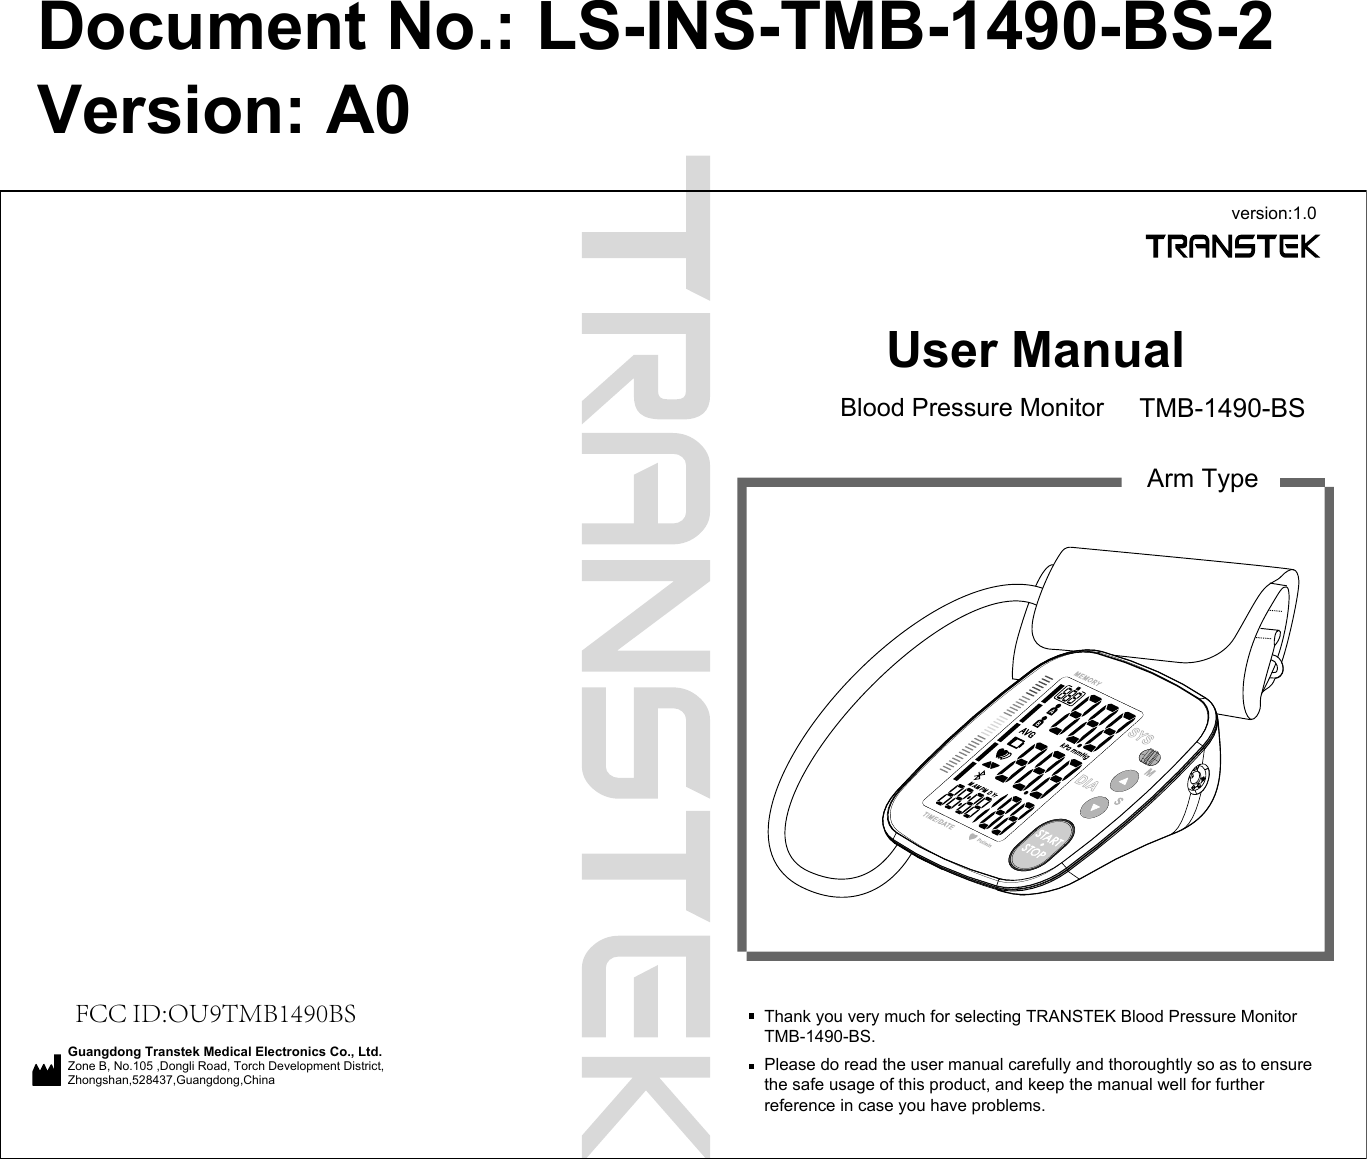 User ManualBlood Pressure Monitor TMB-1490-BSArm TypeThank you very much for selecting TRANSTEK Blood Pressure MonitorTMB-1490-BS.Please do read the user manual carefully and thoroughtly so as to ensure the safe usage of this product, and keep the manual well for further reference in case you have problems.version:1.0FCC ID:OU9TMB1490BSGuangdong Transtek Medical Electronics Co., Ltd.Zone B, No.105 ,Dongli Road, Torch Development District, Zhongshan,528437,Guangdong,China  Document No.: LS-INS-TMB-1490-BS-2Version: A0